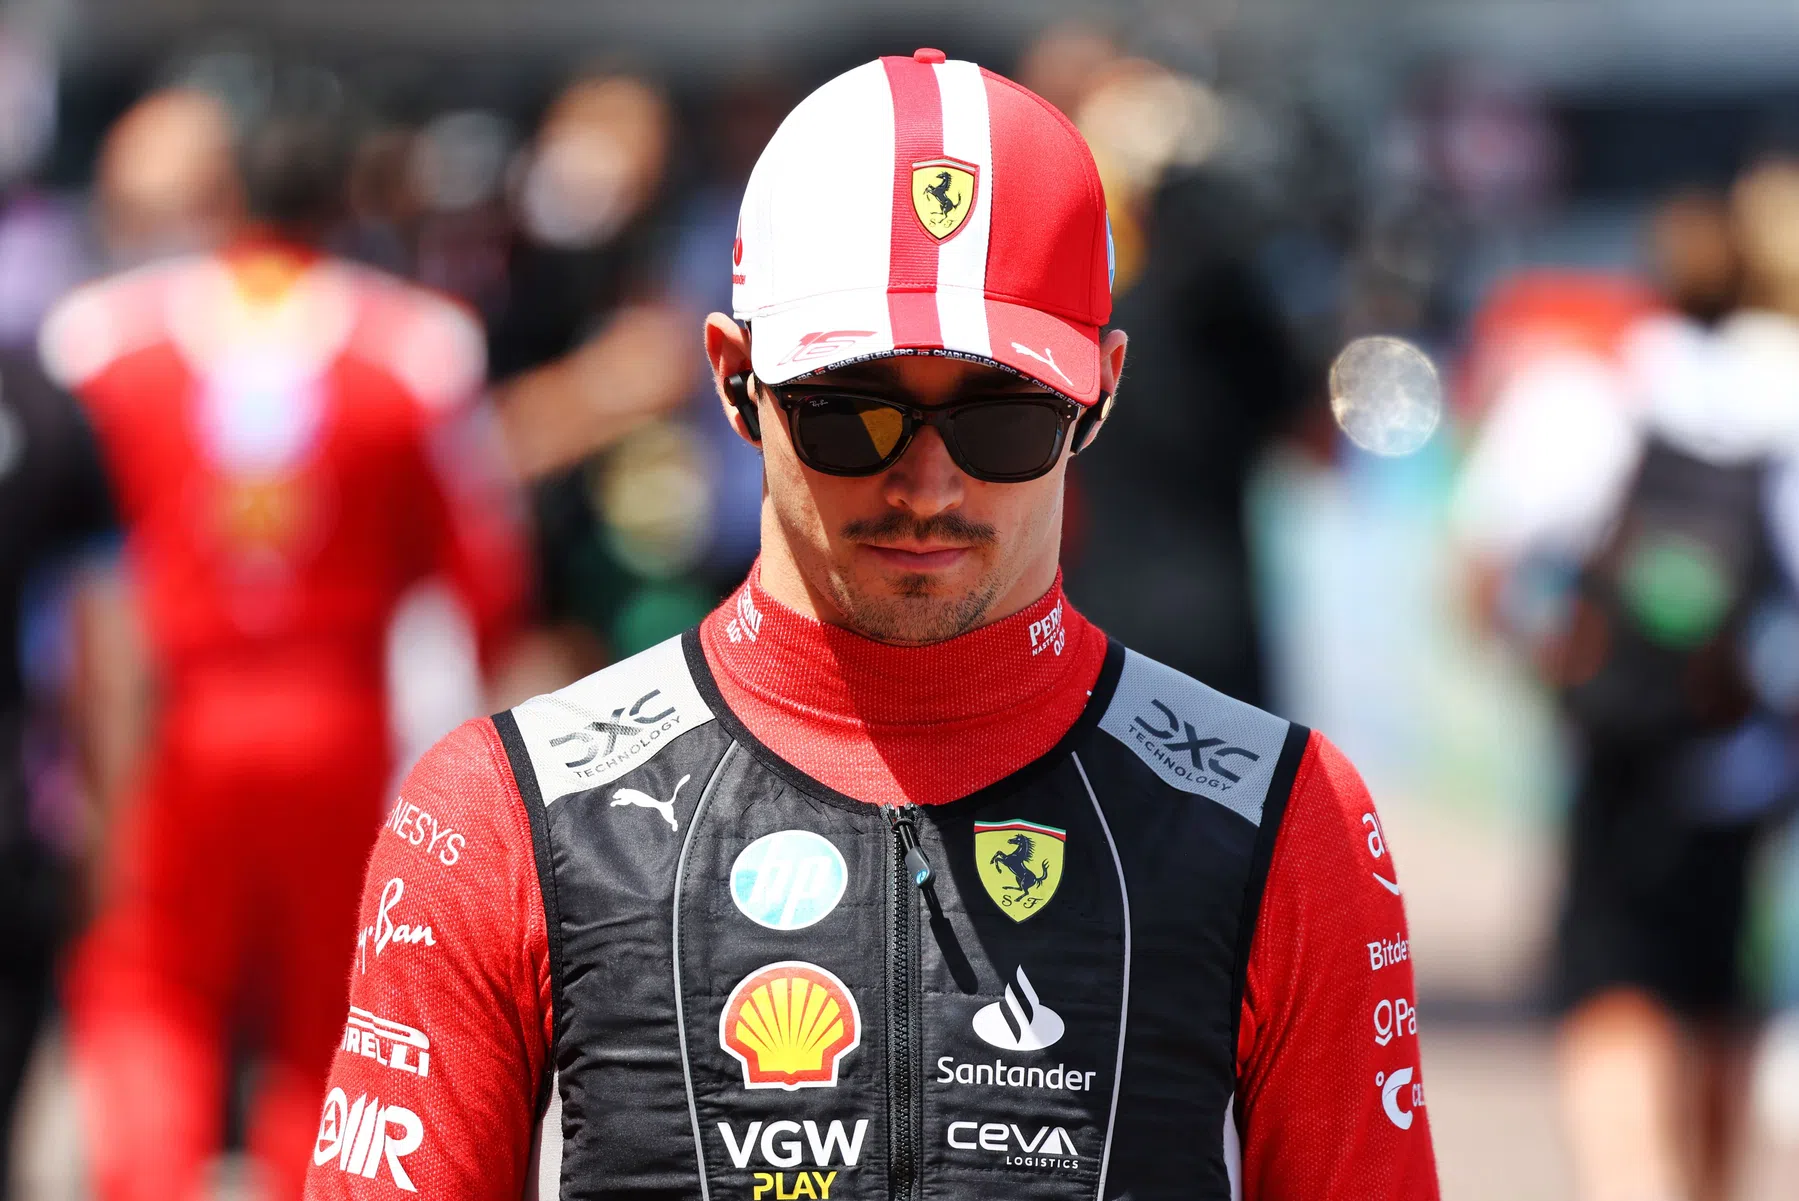 Charles Leclerc open about criticism over things that are not true